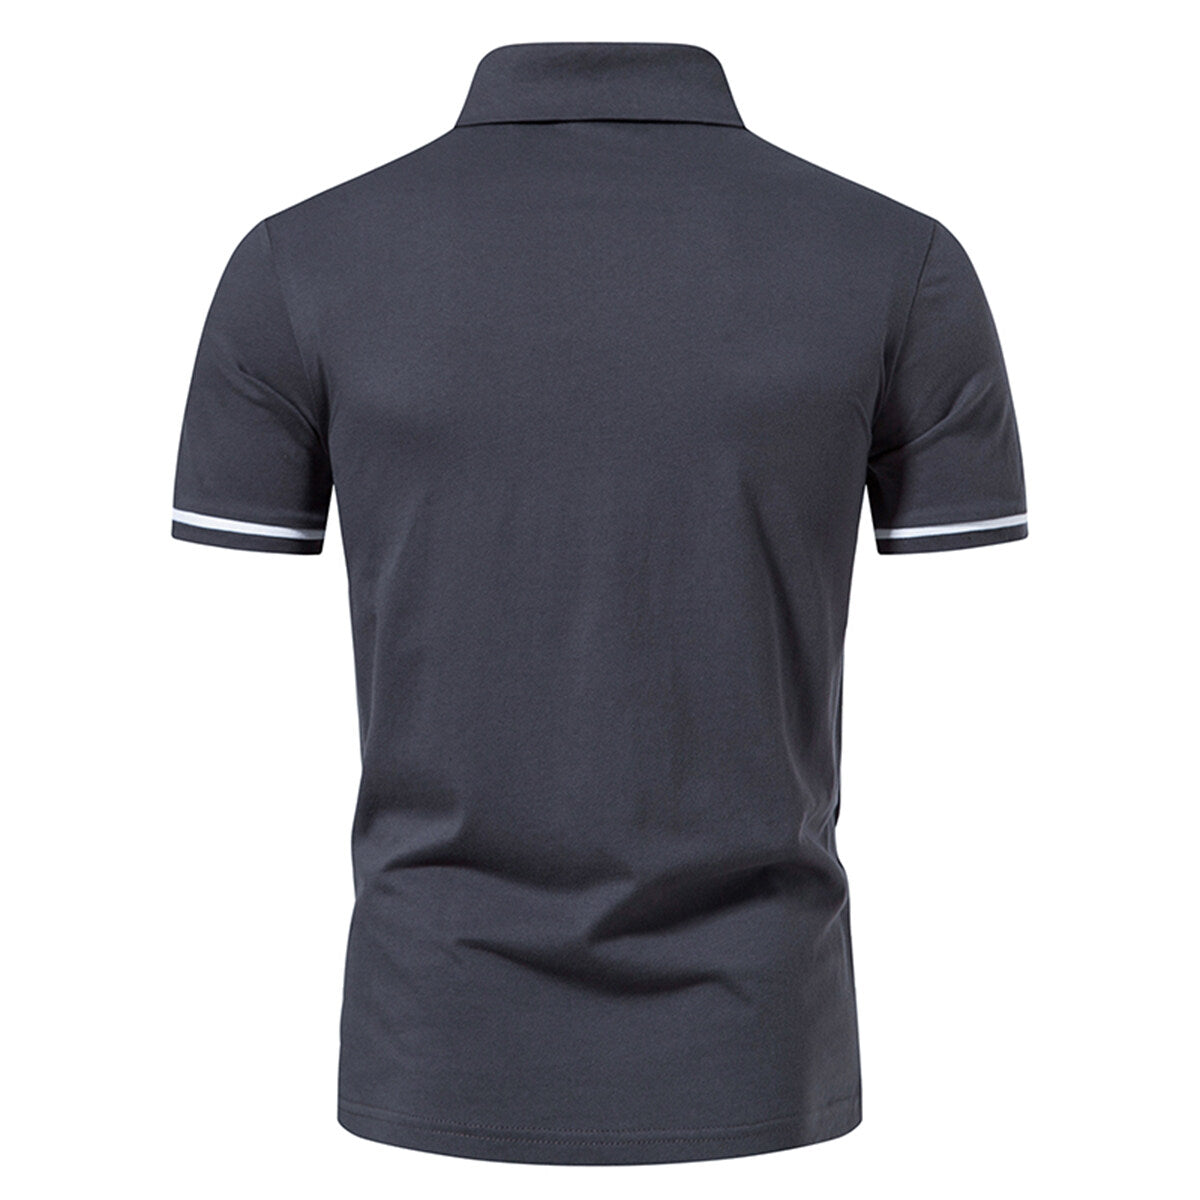 Men's Fitted Tailored Polo Neck Short-Sleeve T-Shirt Grey